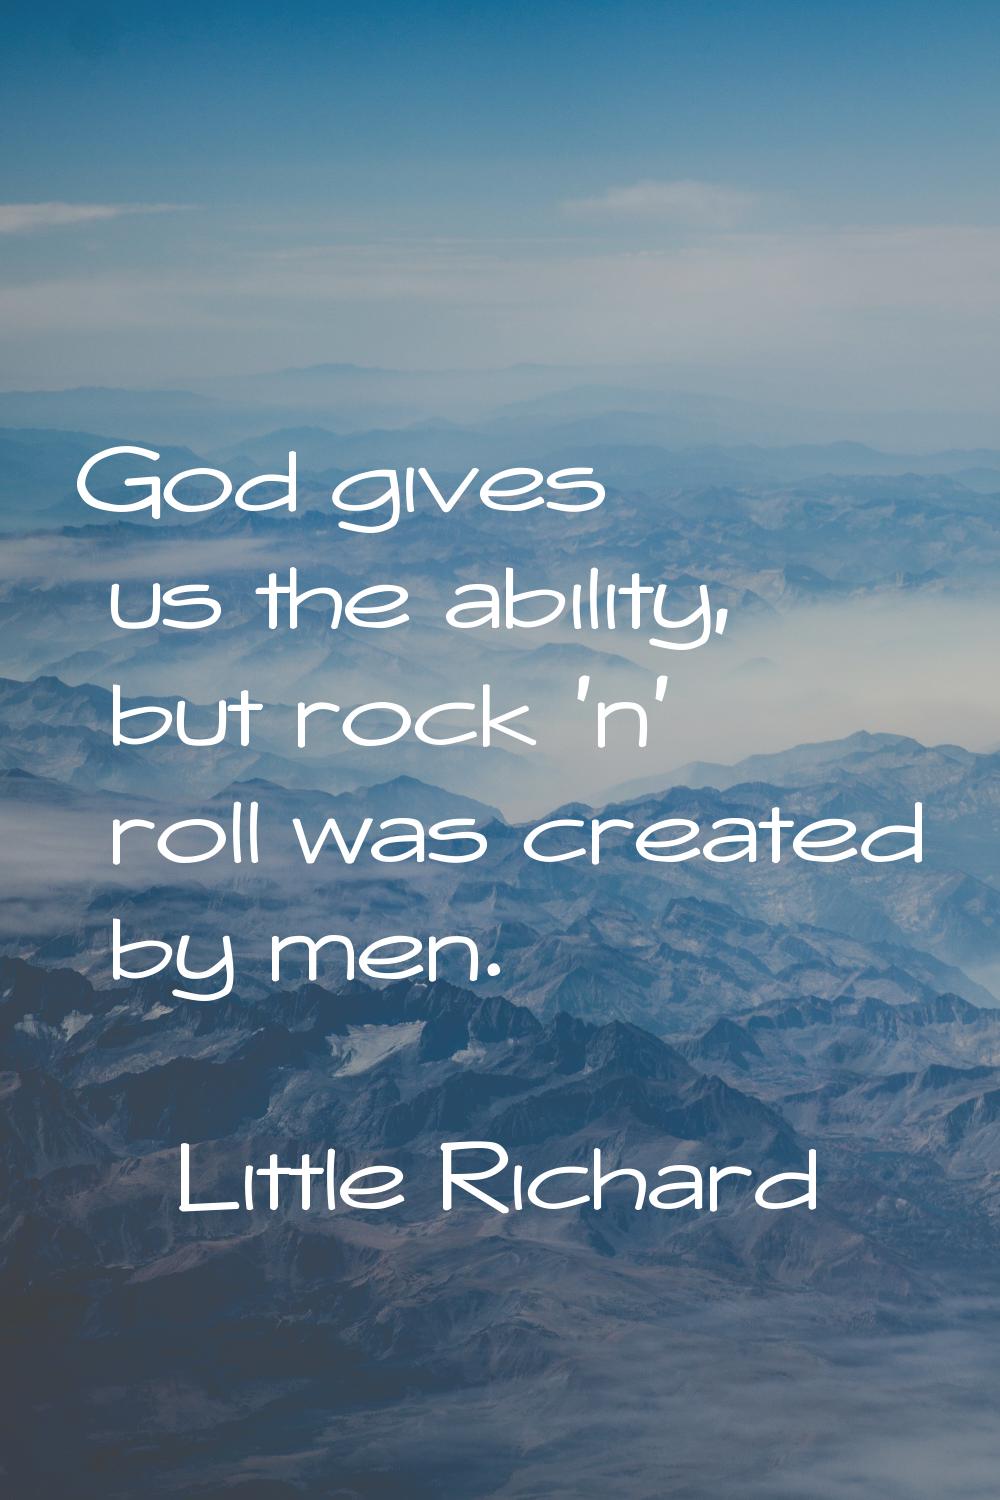 God gives us the ability, but rock 'n' roll was created by men.